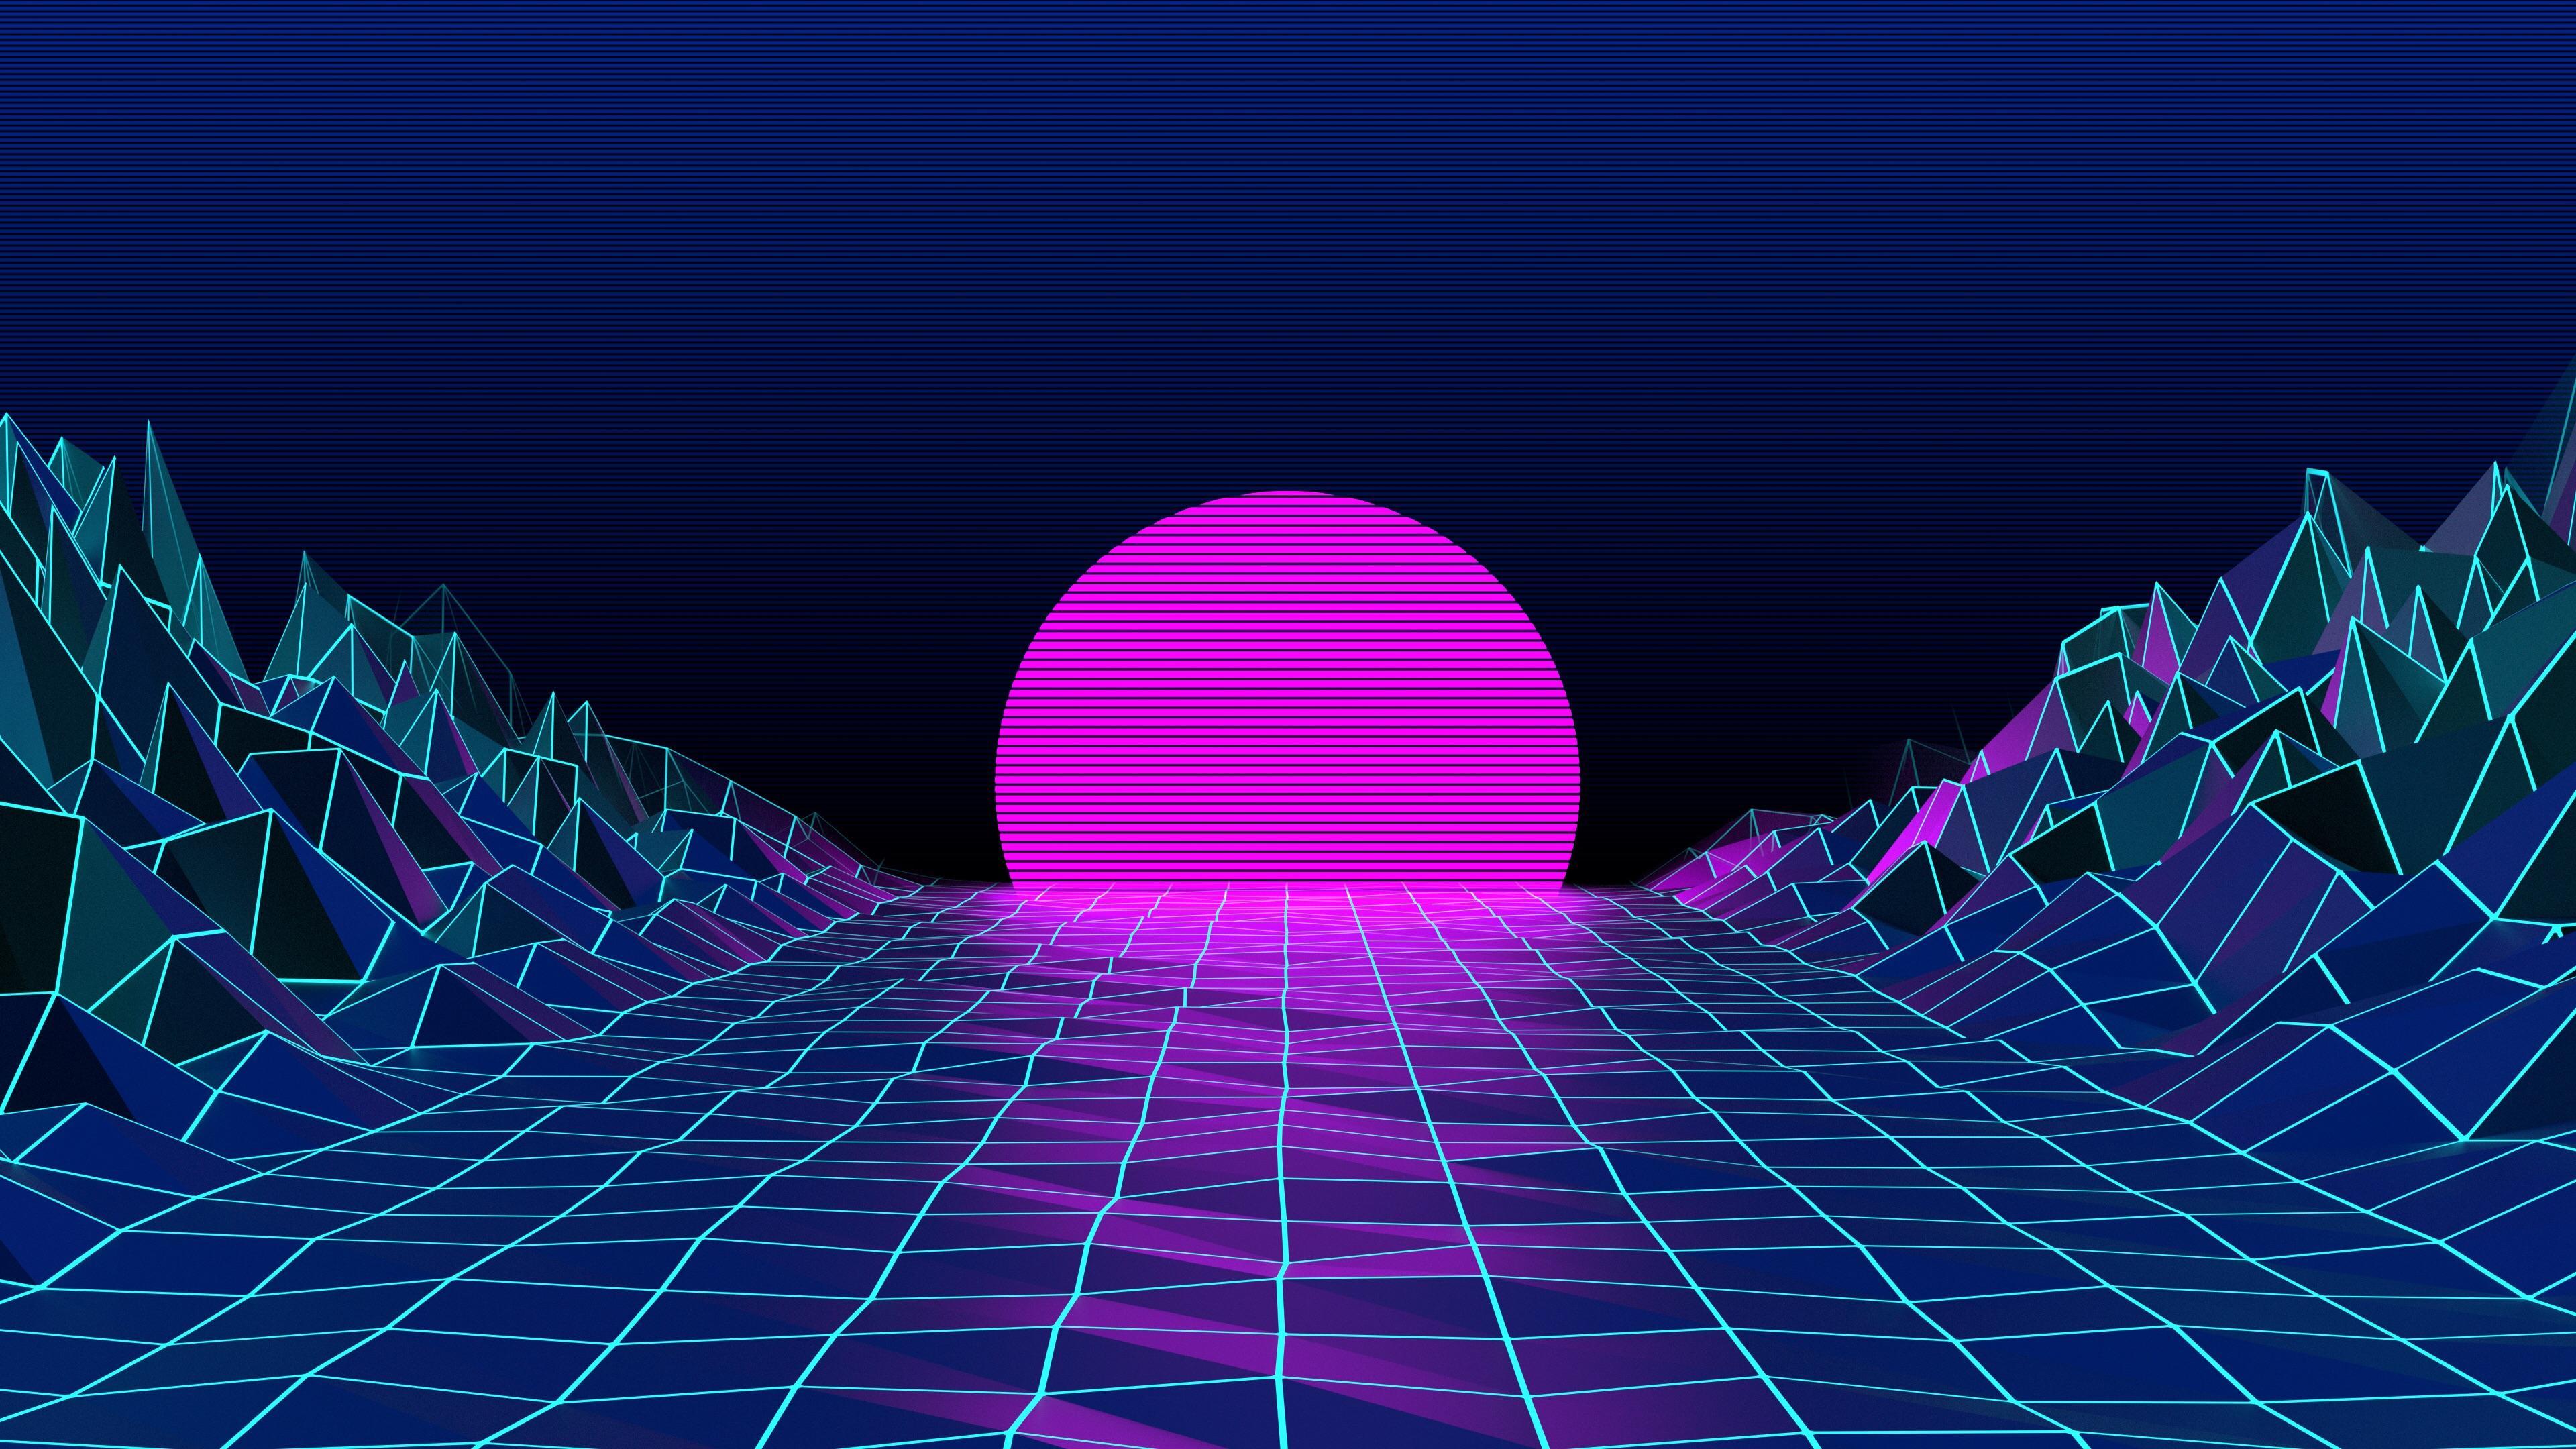 OutRun Racing Live Wallpaper [2560 x 1440] : r/wallpapers